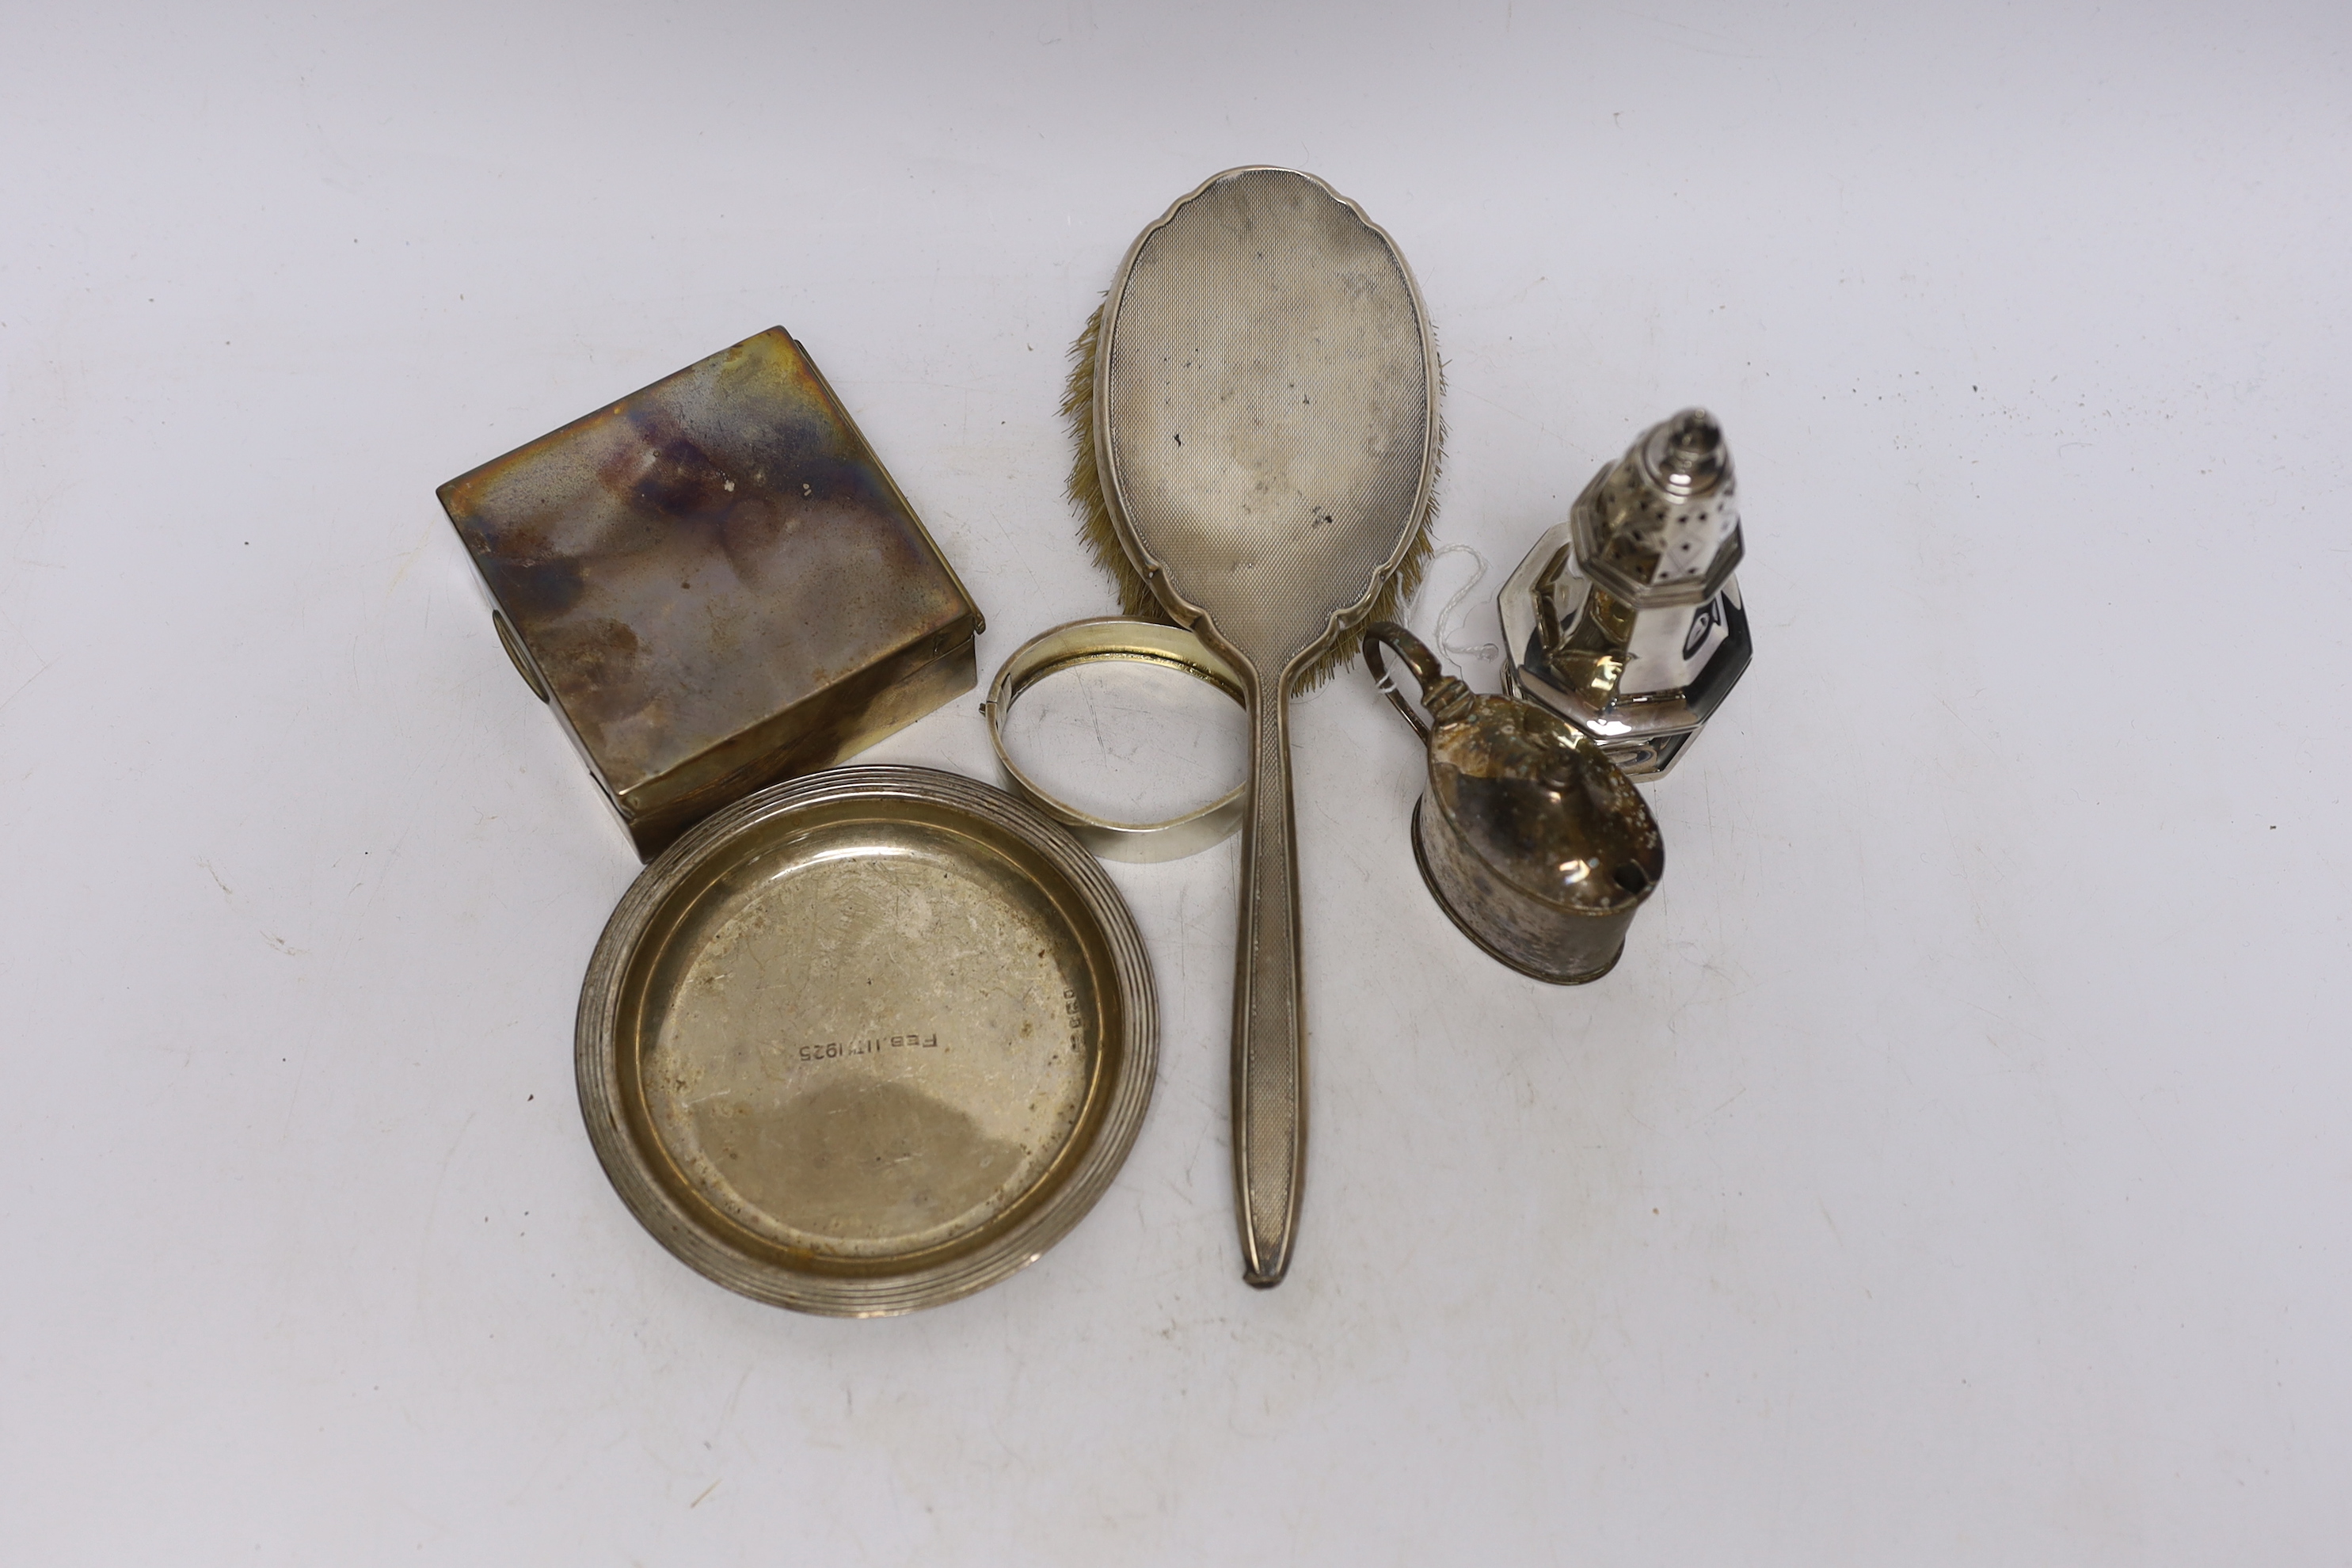 Sundry silver including a mounted hair brush, cigarette box, small dish, bangle, caster and mustard.